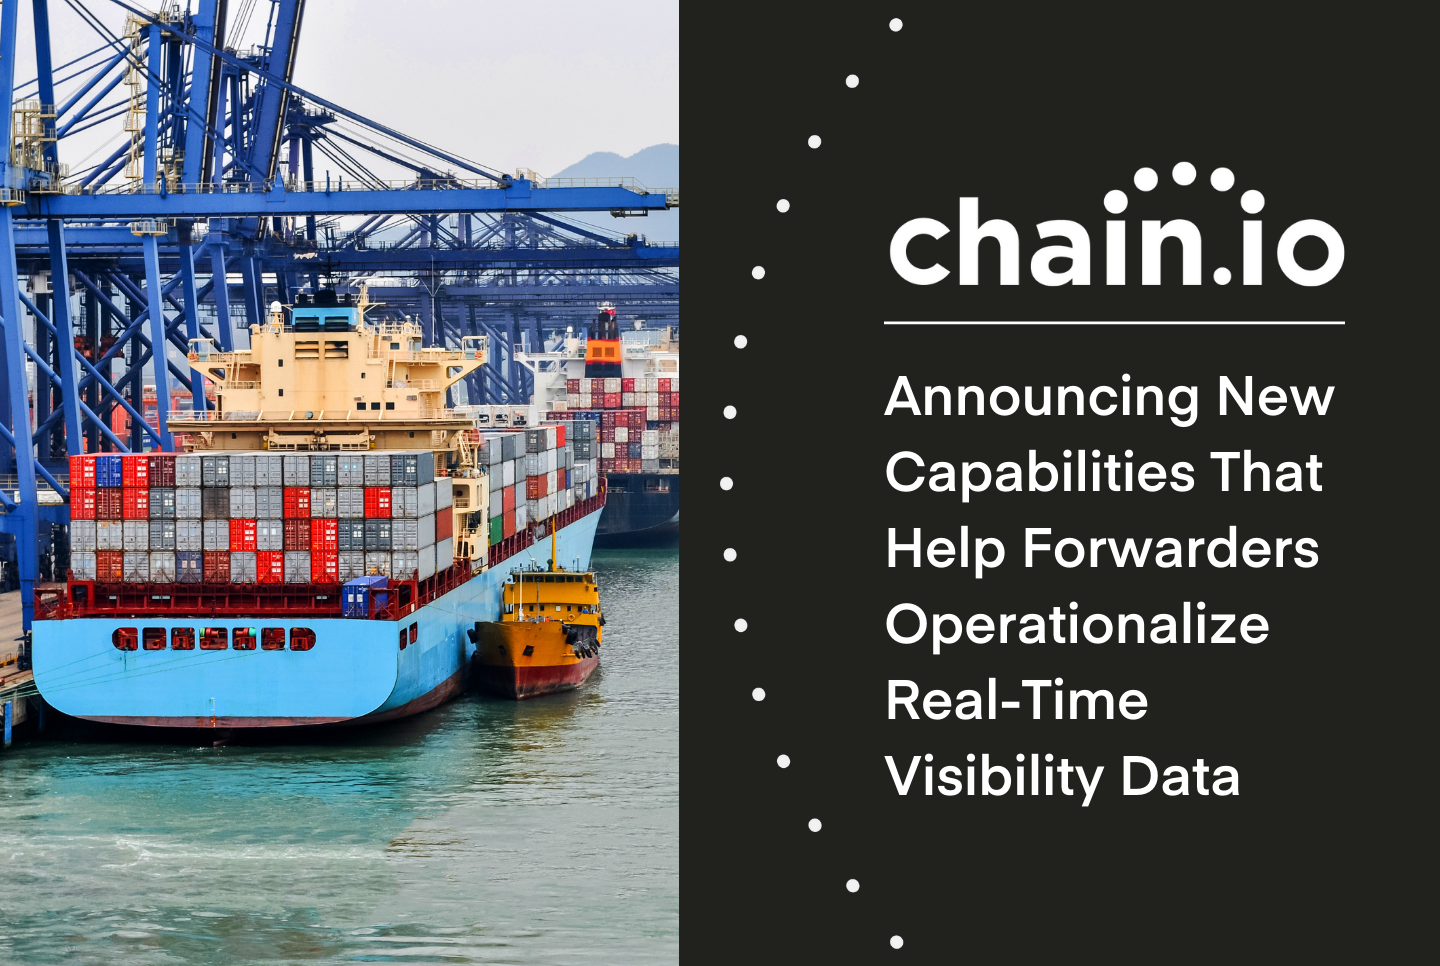 new product release that makes supply chain visibility data more available and actionable for the freight forwarding community.